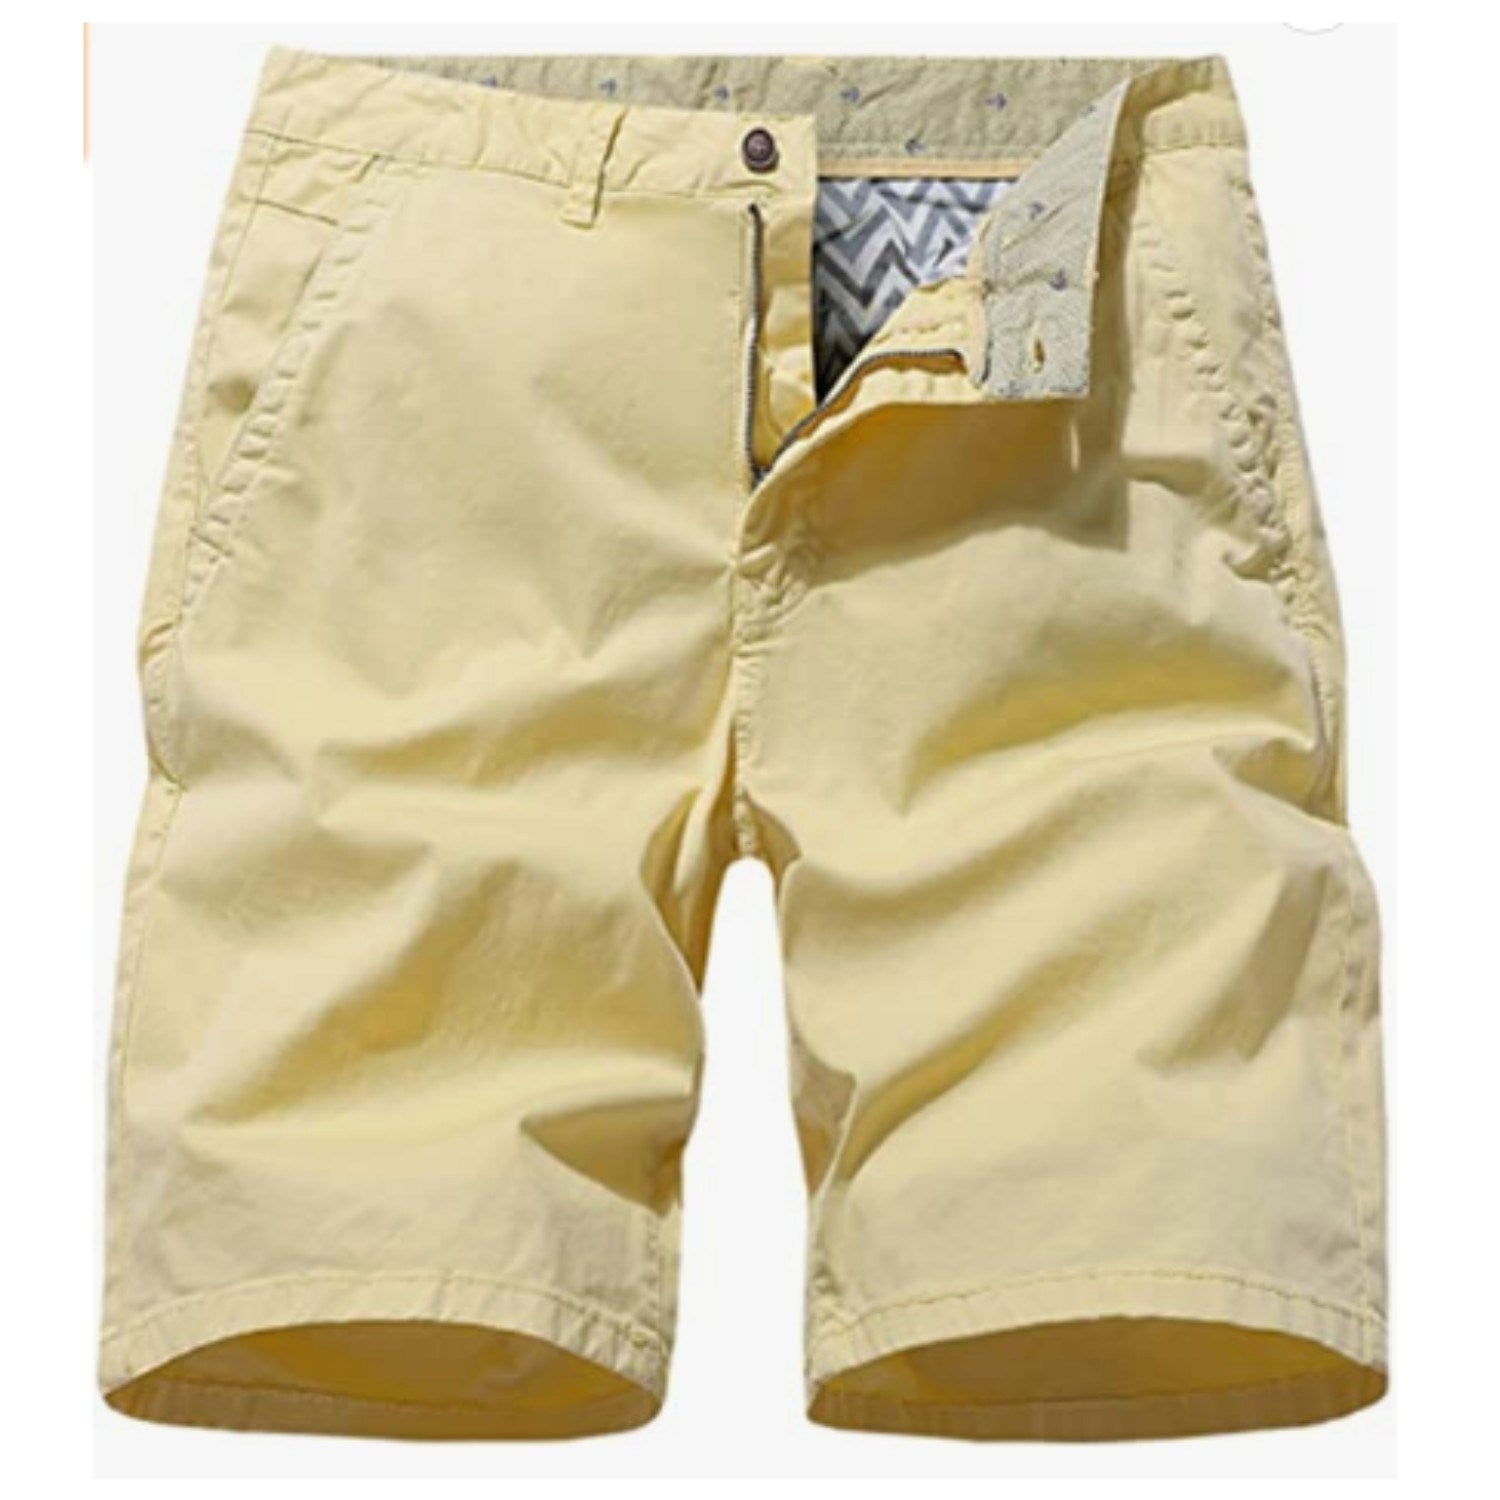 Men's Solid Color Casual Shorts Fashion Straight Cut Pants Beach Shorts Outdoor Sports Shorts